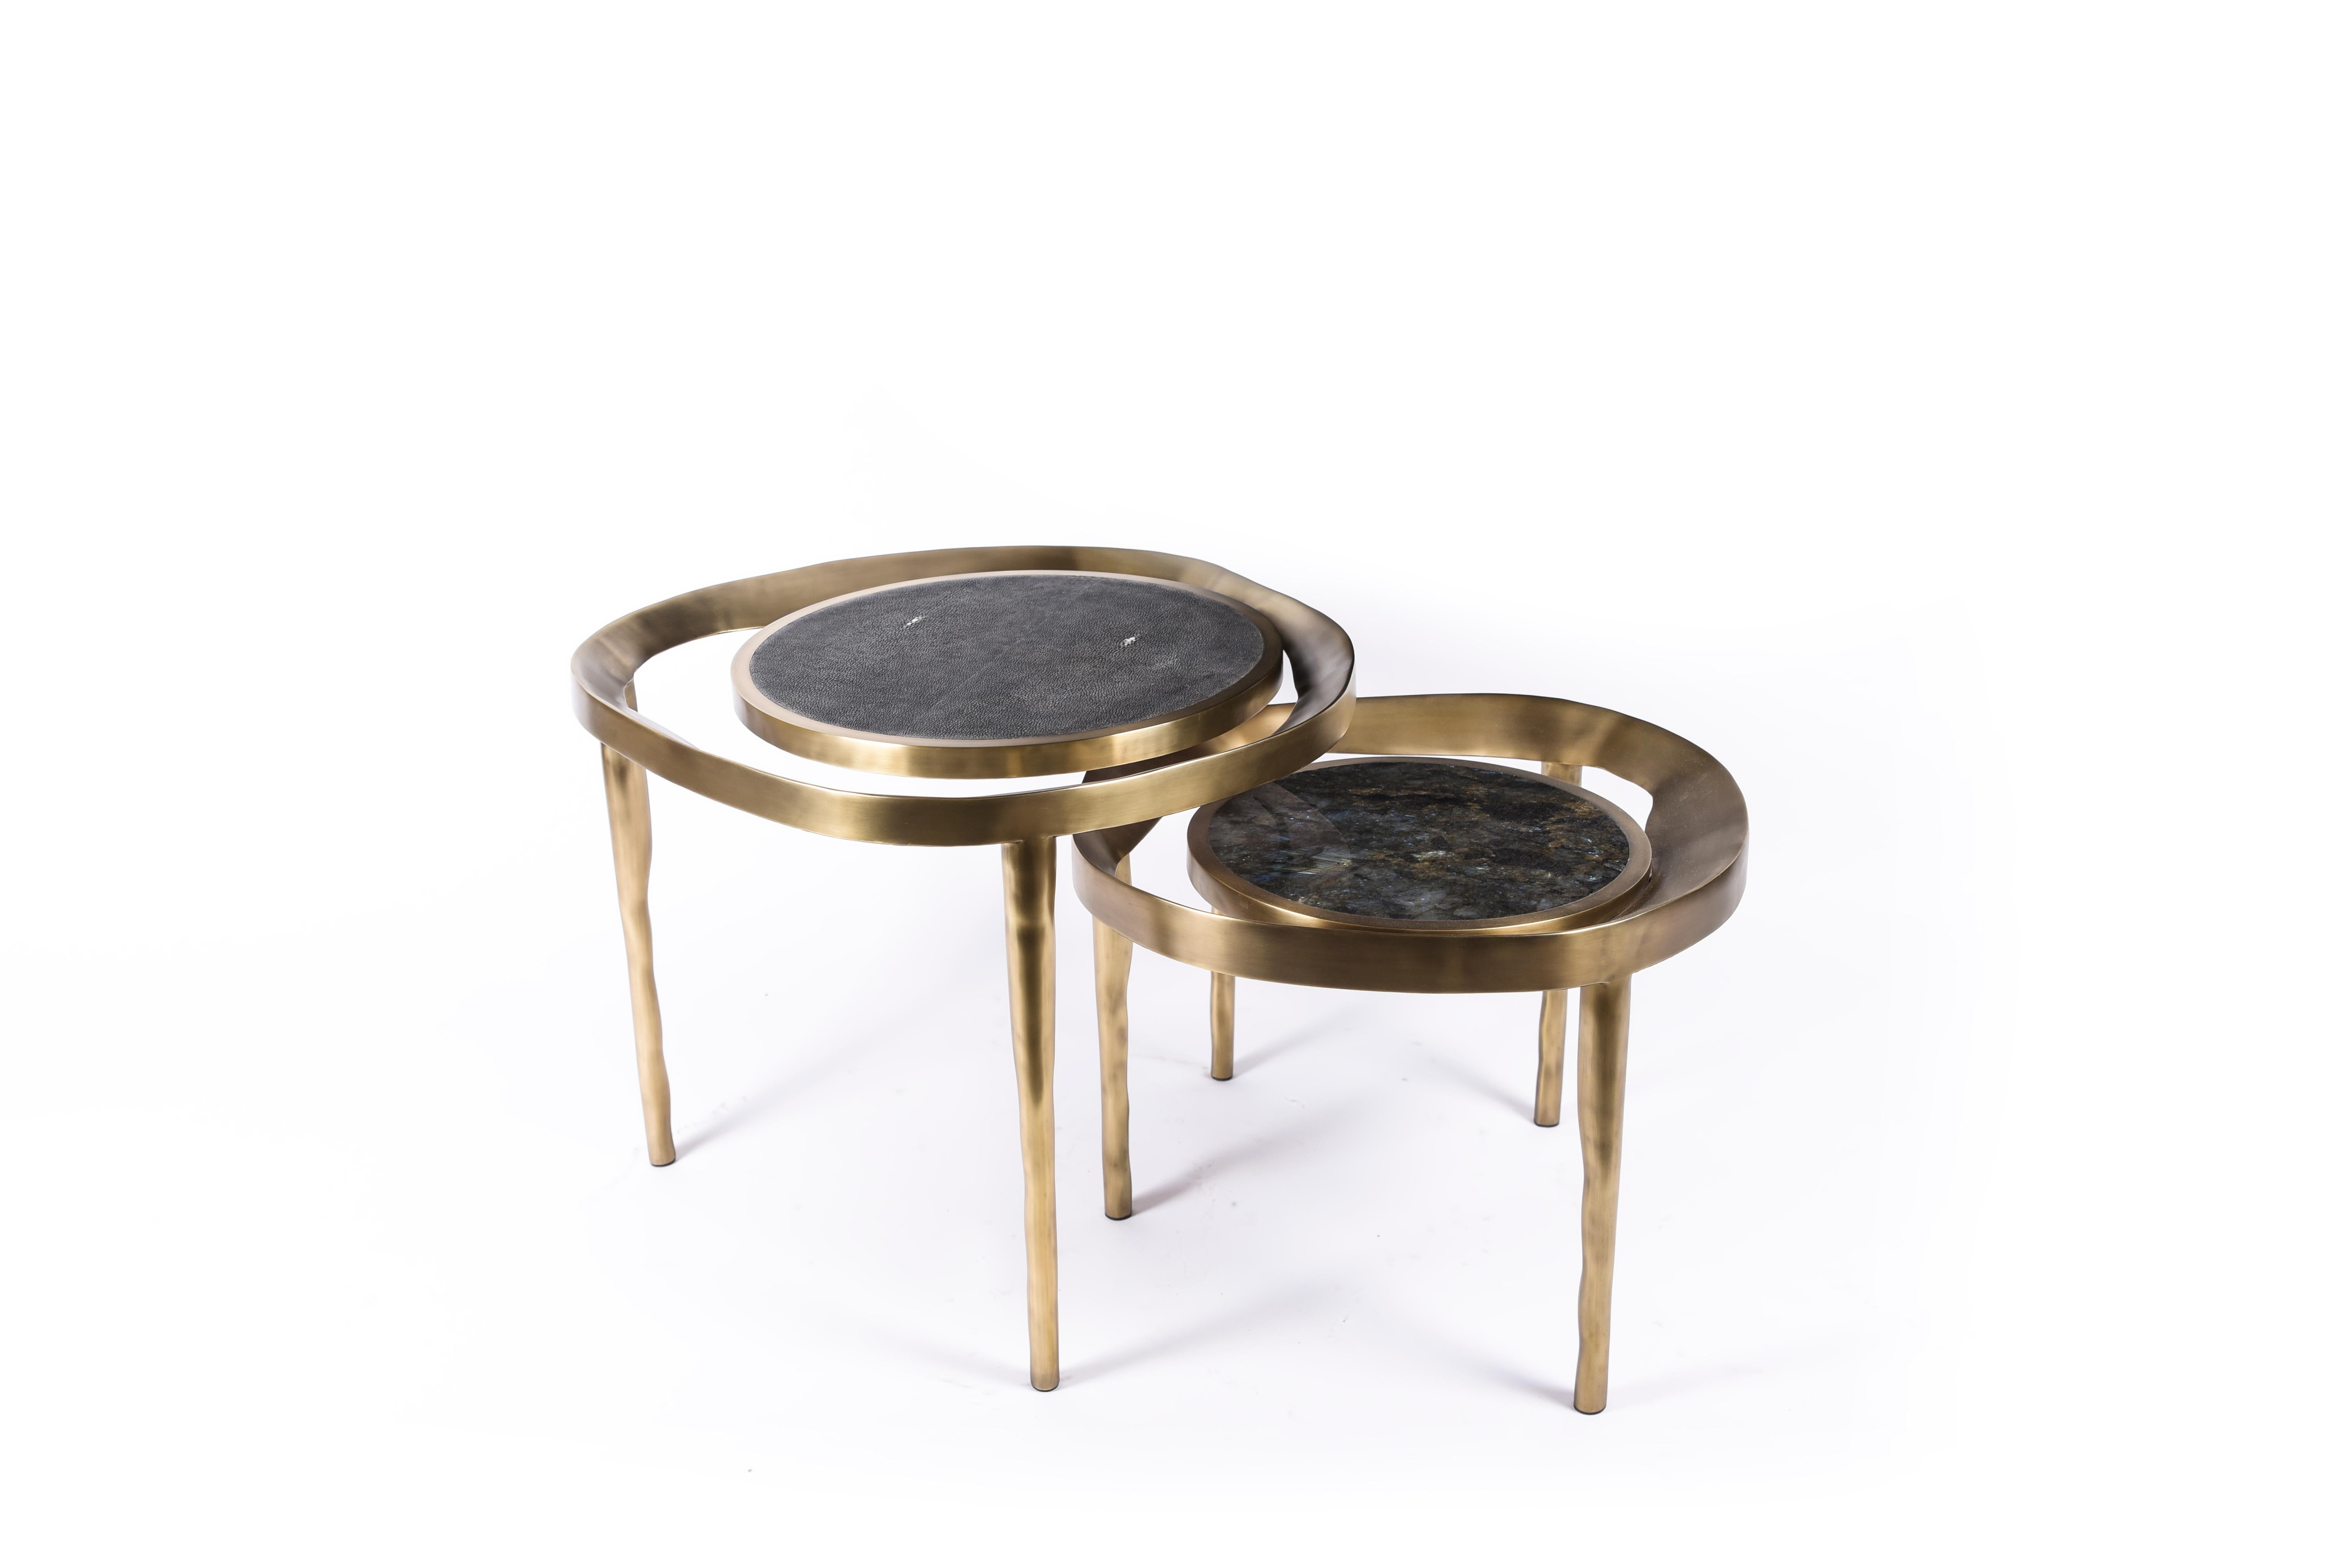 The set of 2 Lily Melting Coffee Tables are a whimsical and dramatic piece for any space. The amorphous-shaped bronze-patina brass frame morphs onto the bumpy shaped legs. The floating circular tops are inlaid in coal black shagreen and Lemurian